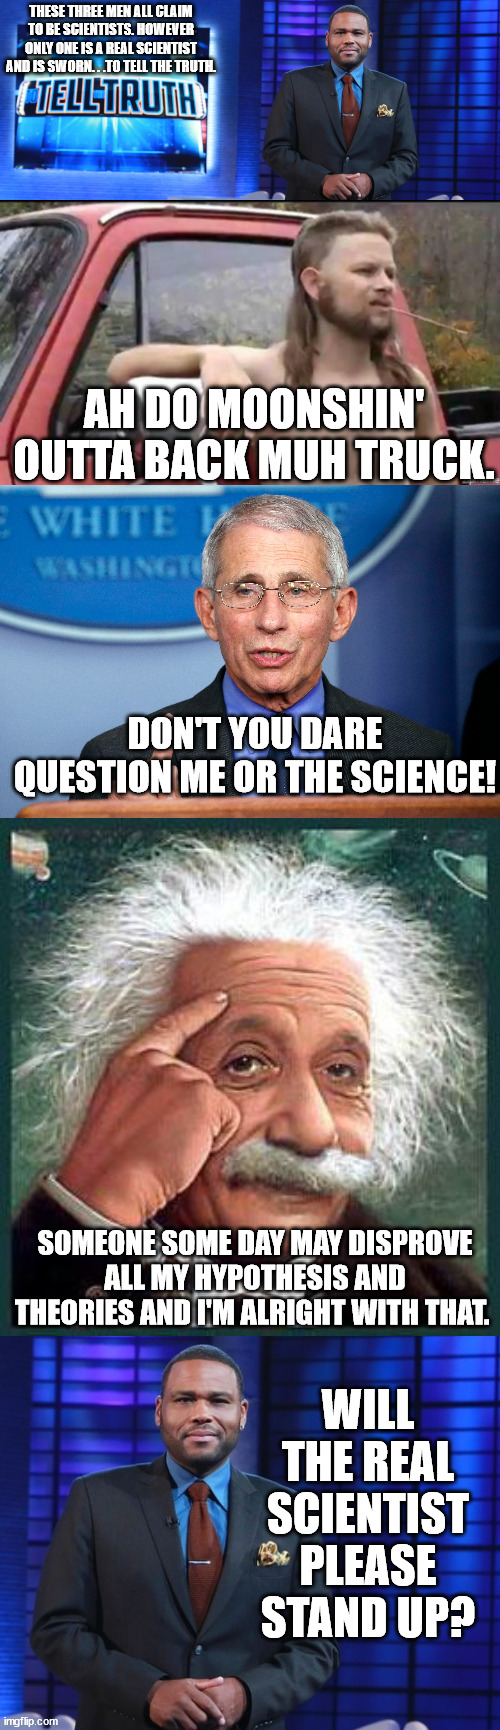 Easiest round of 'To Tell The Truth' ever. | THESE THREE MEN ALL CLAIM TO BE SCIENTISTS. HOWEVER ONLY ONE IS A REAL SCIENTIST AND IS SWORN. . .TO TELL THE TRUTH. AH DO MOONSHIN' OUTTA BACK MUH TRUCK. DON'T YOU DARE QUESTION ME OR THE SCIENCE! SOMEONE SOME DAY MAY DISPROVE ALL MY HYPOTHESIS AND THEORIES AND I'M ALRIGHT WITH THAT. WILL THE REAL SCIENTIST PLEASE STAND UP? | image tagged in almost politically correct redneck,einstein,dr fauci,government corruption,the truth | made w/ Imgflip meme maker